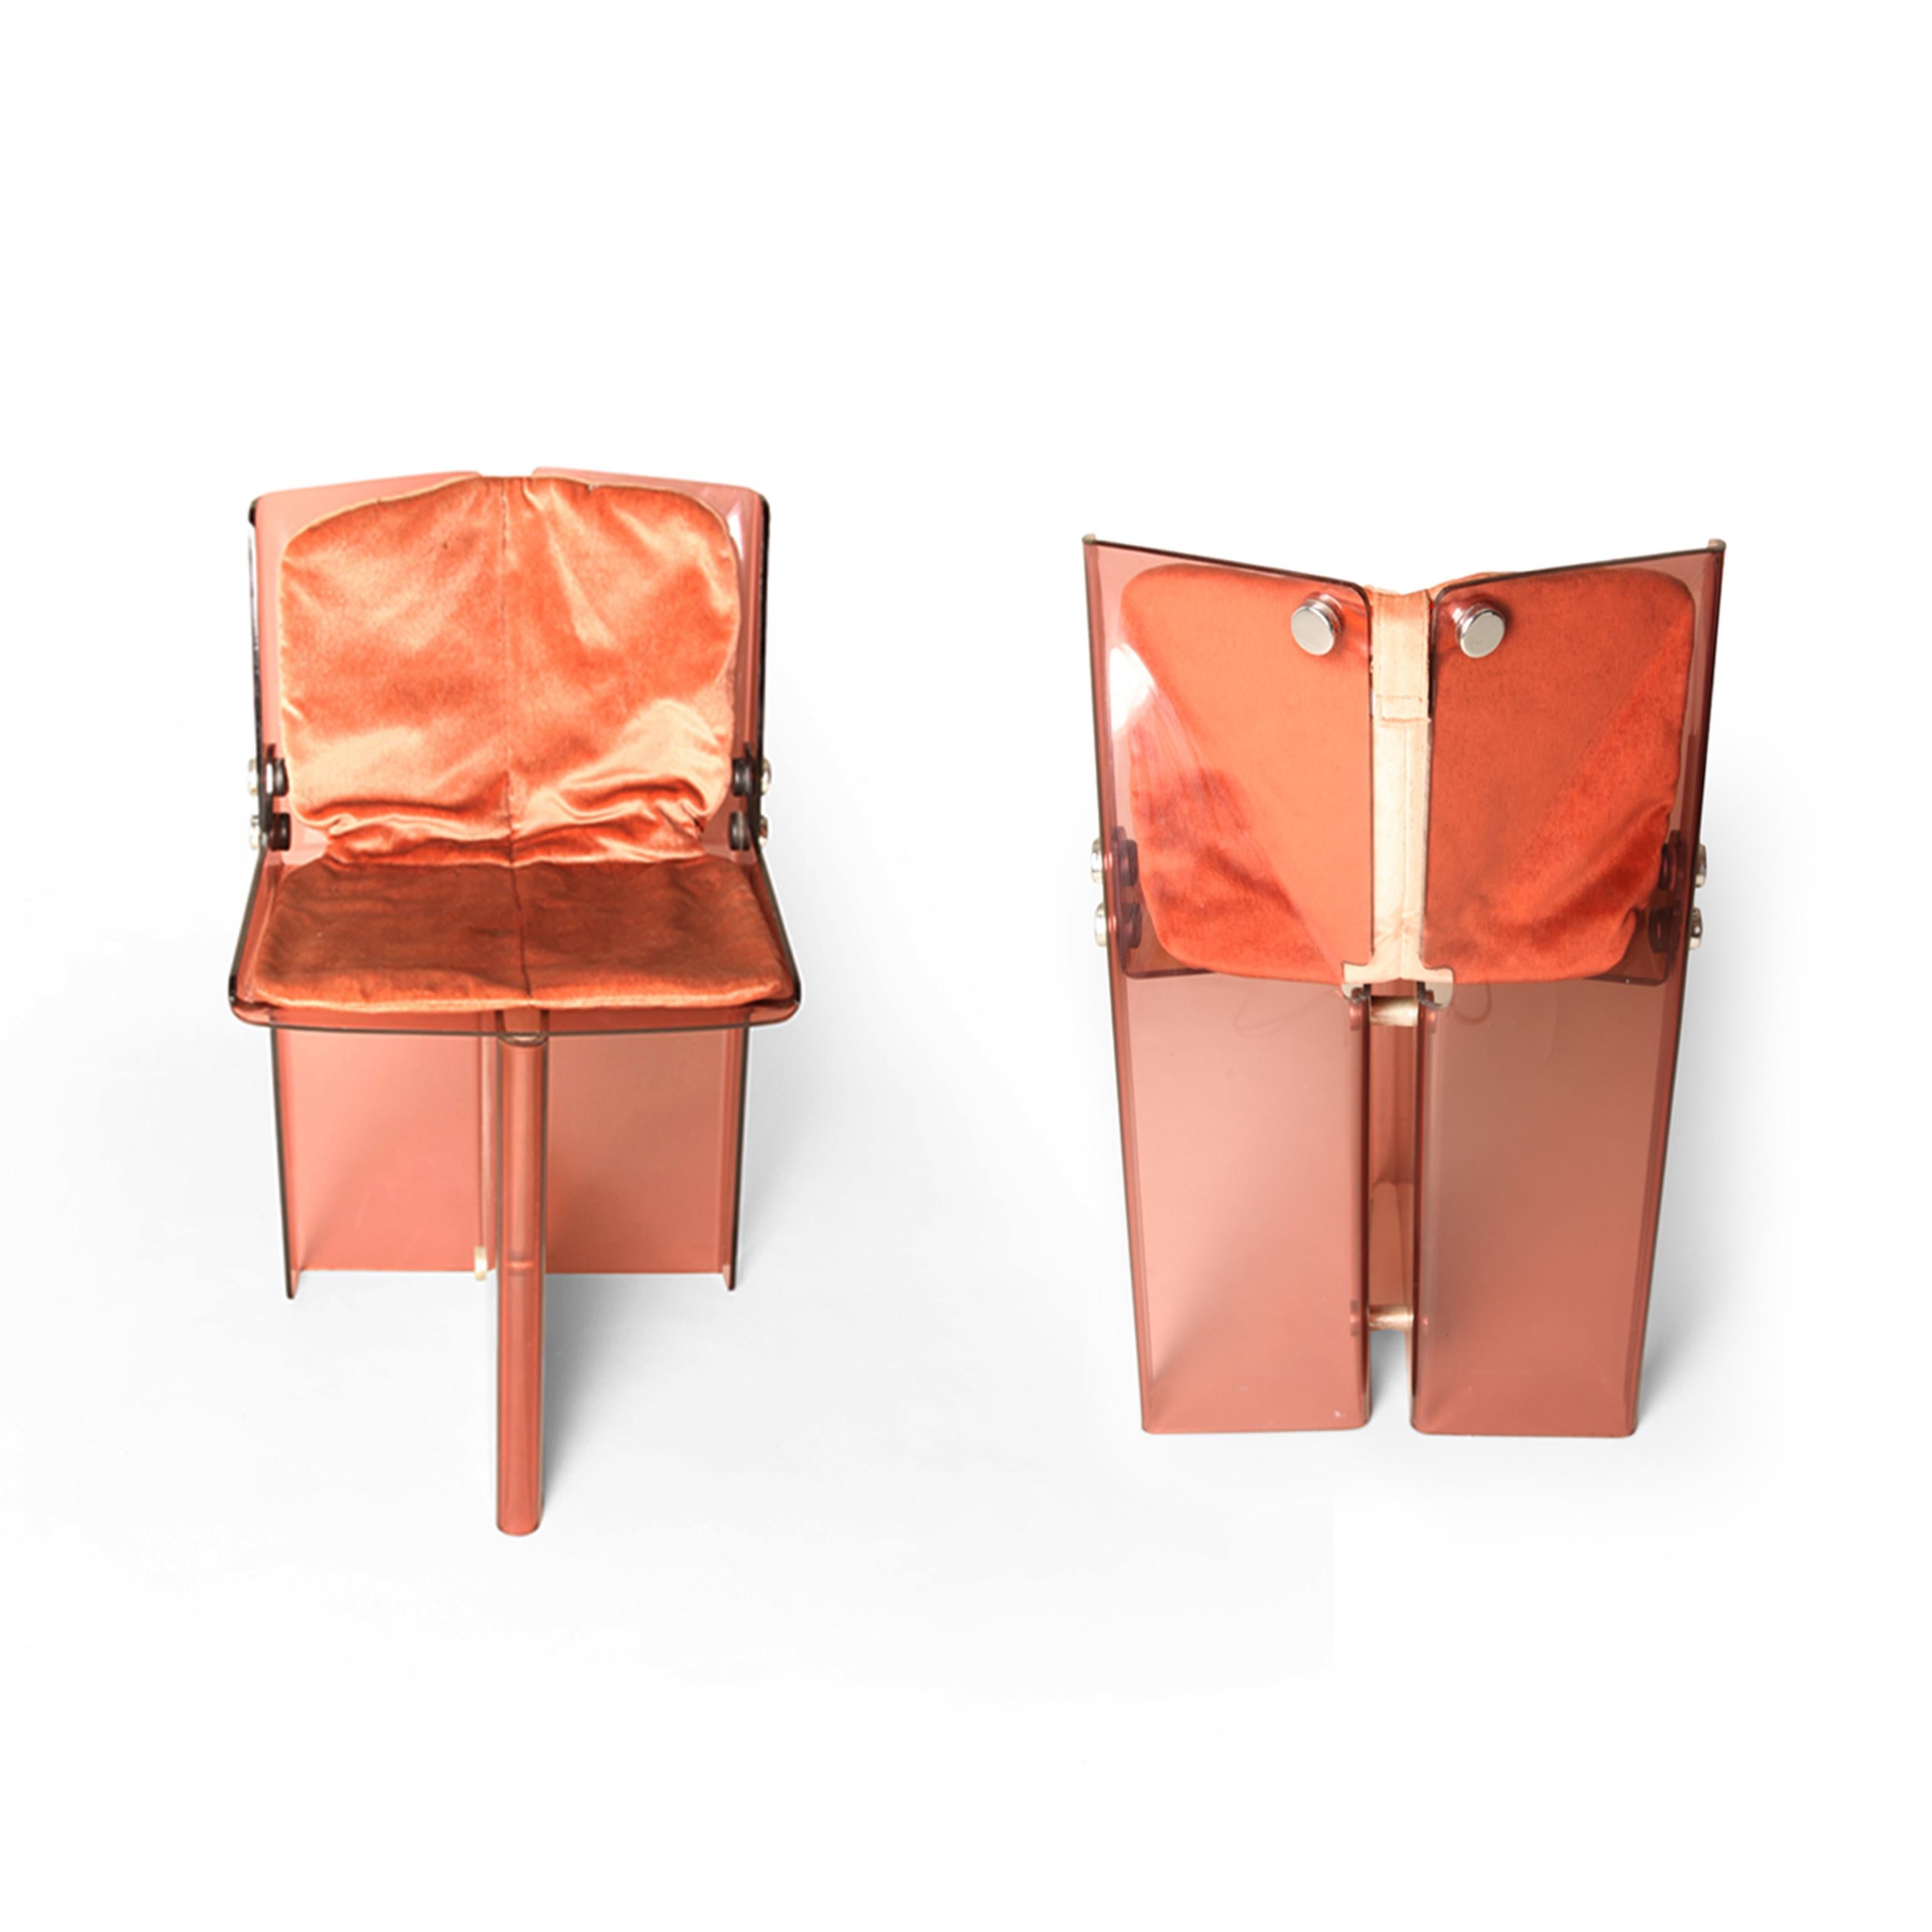 Chrome Documented Peter Banks Unique Smoked Perspex Dining Chairs, MidCentury Space Age